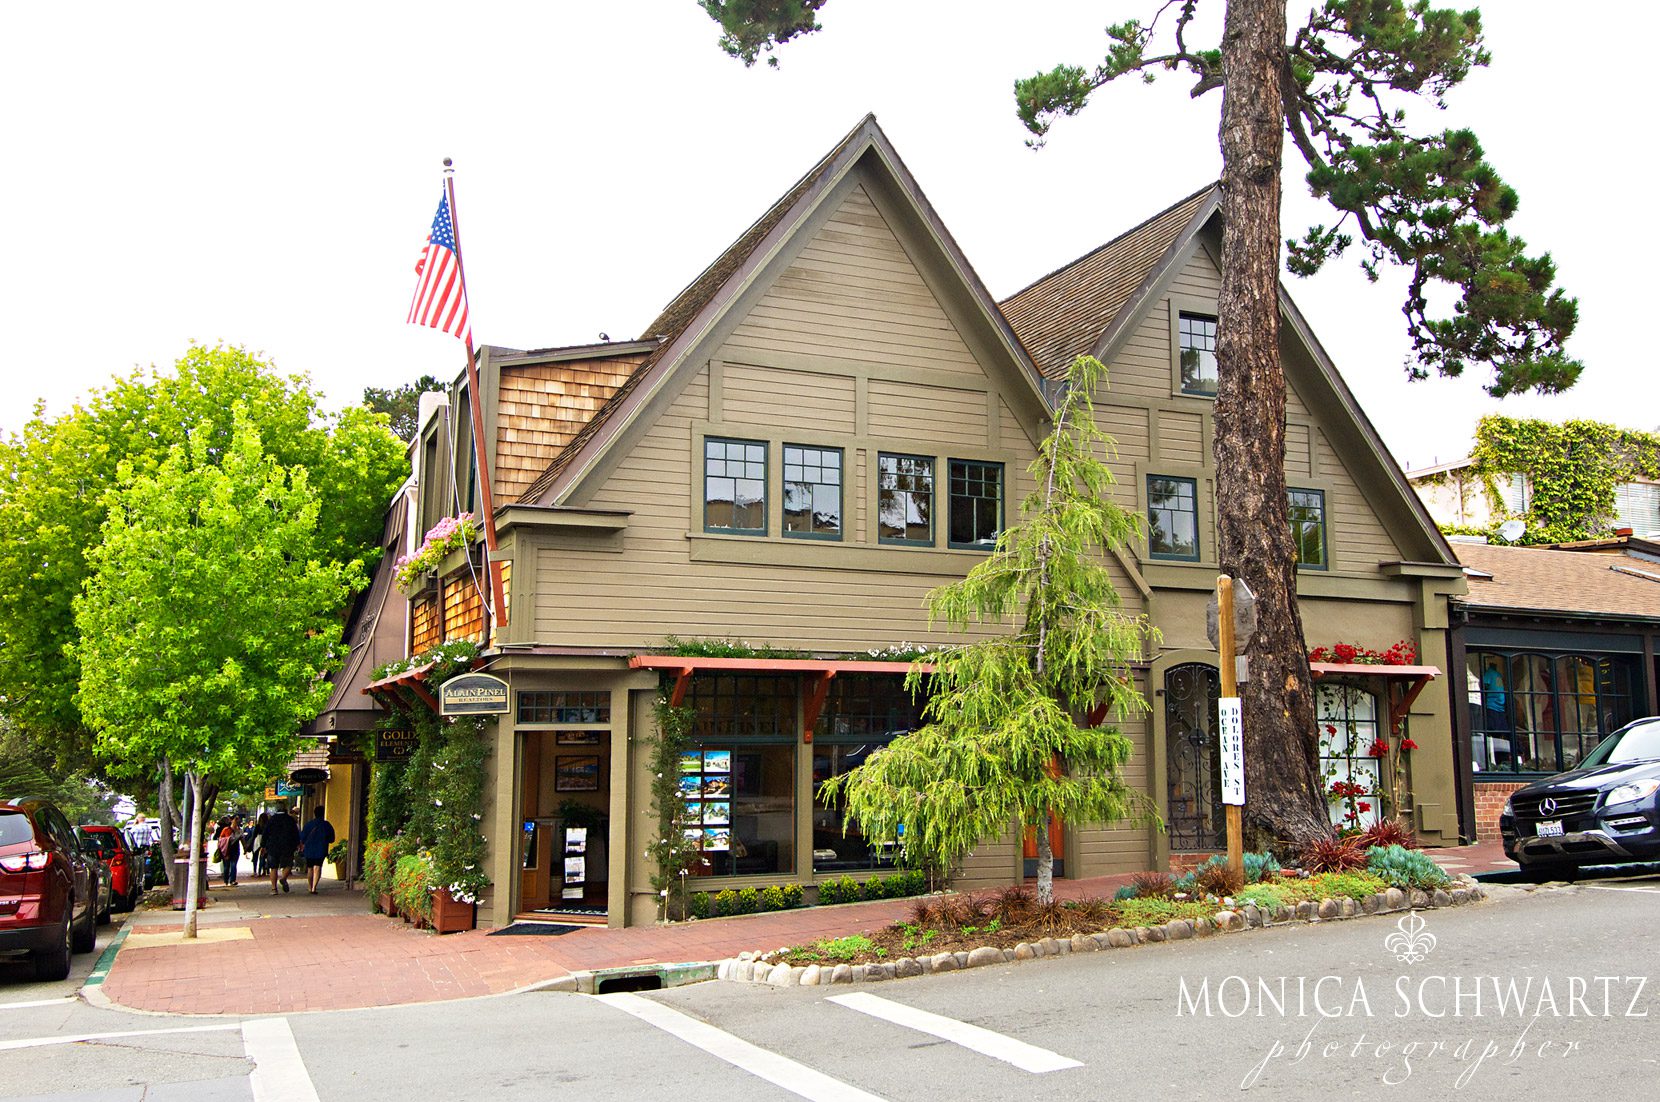 Corner-of-Ocean-Avenue-and-Dolores-Street-in-Carmel-by-the-Sea-California